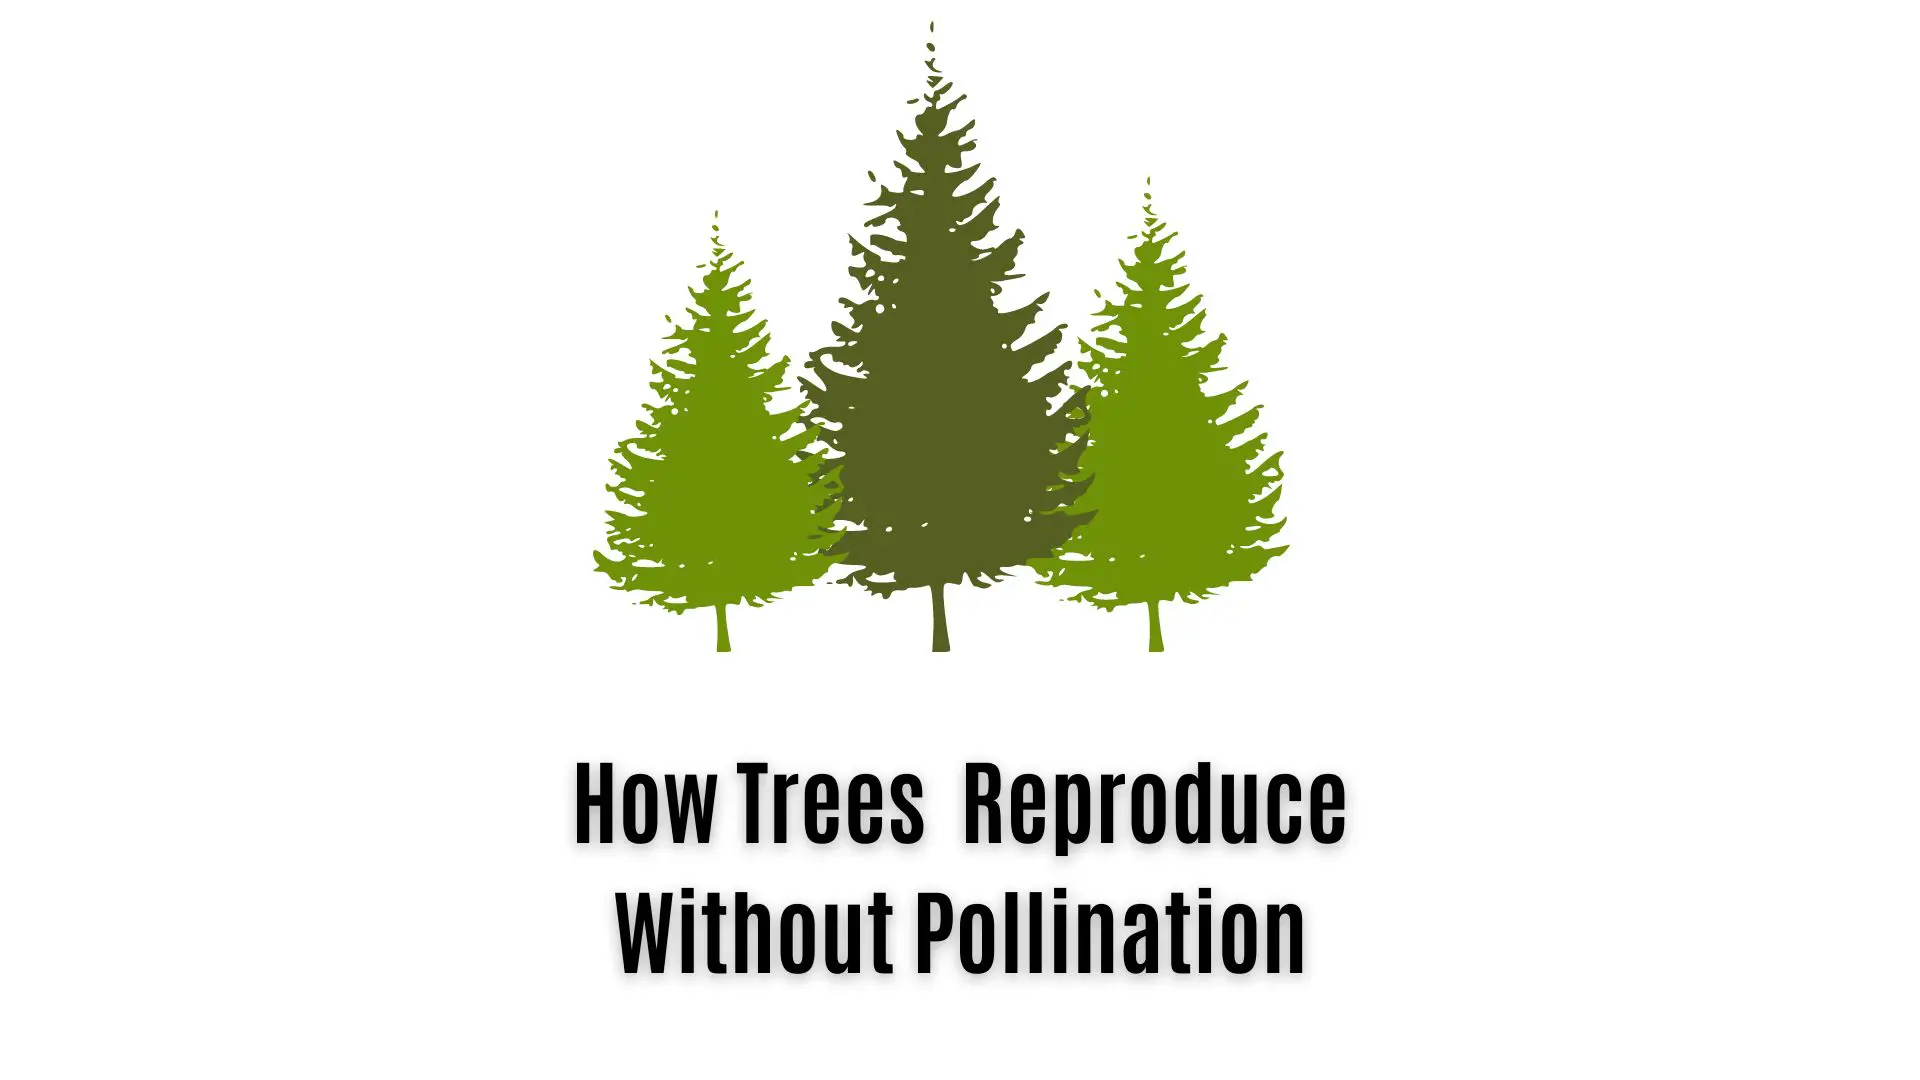 Trees Can Reproduce Without Pollination